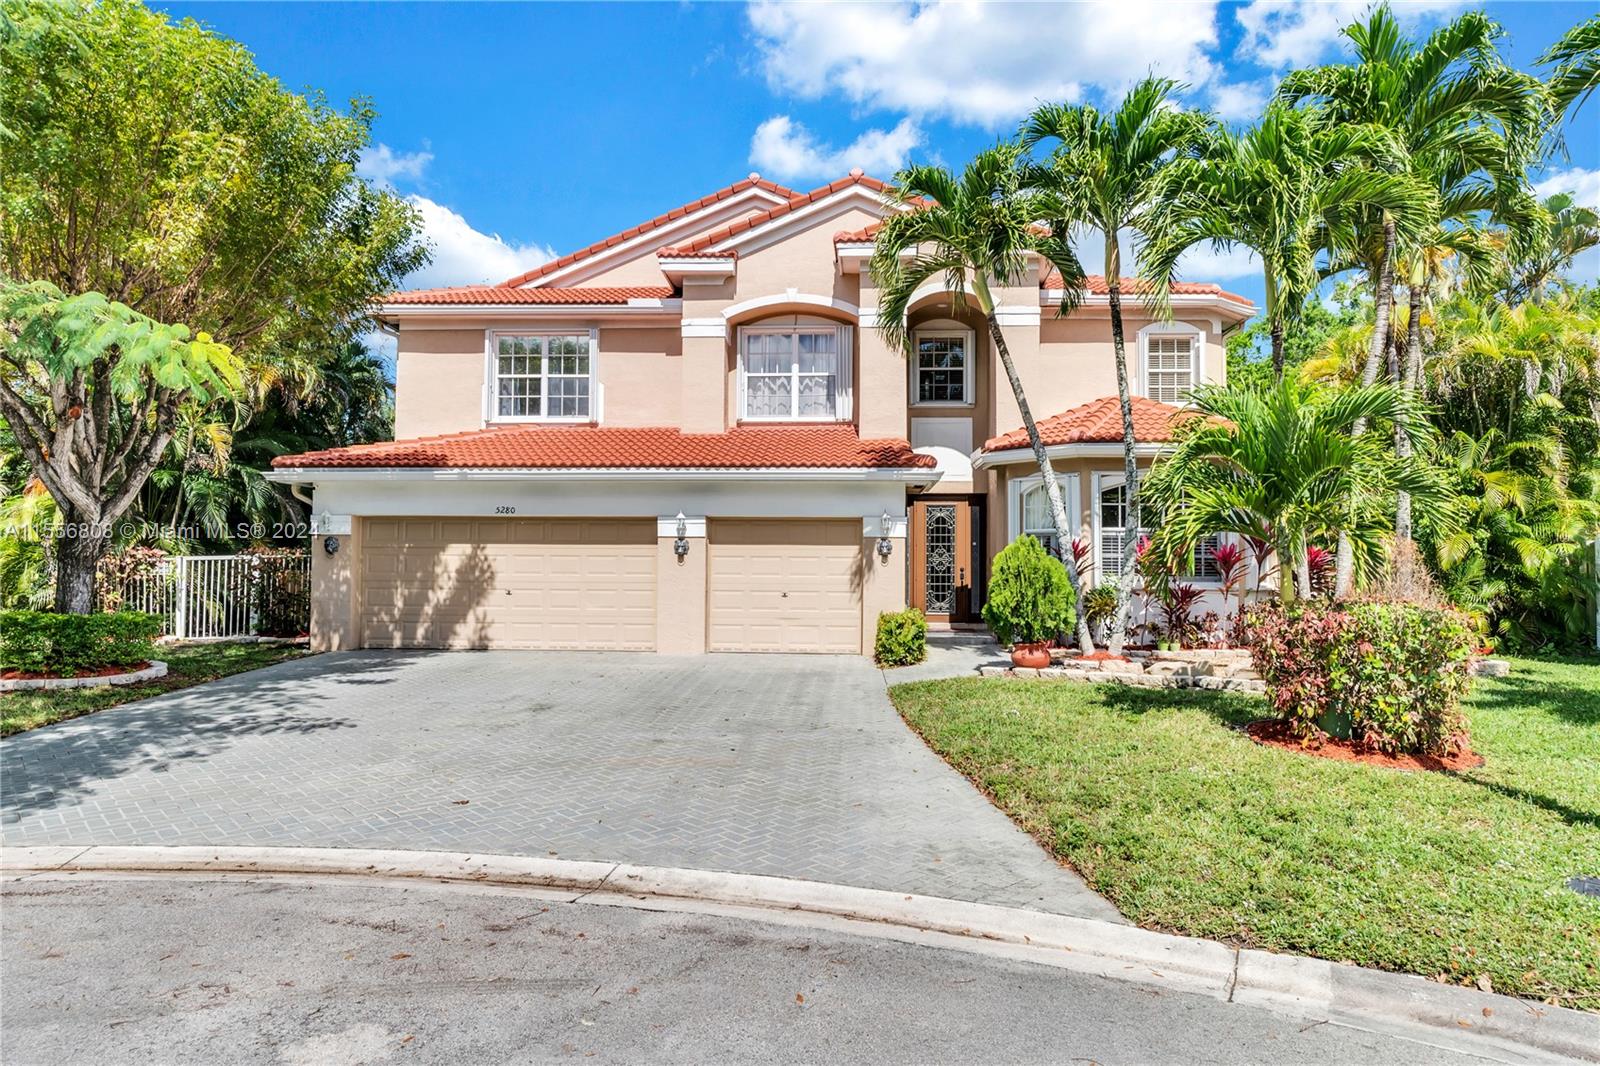 5280 NW 95th Ave, Coral Springs, Florida 33076, 6 Bedrooms Bedrooms, ,3 BathroomsBathrooms,Residential,For Sale,5280 NW 95th Ave,A11556808